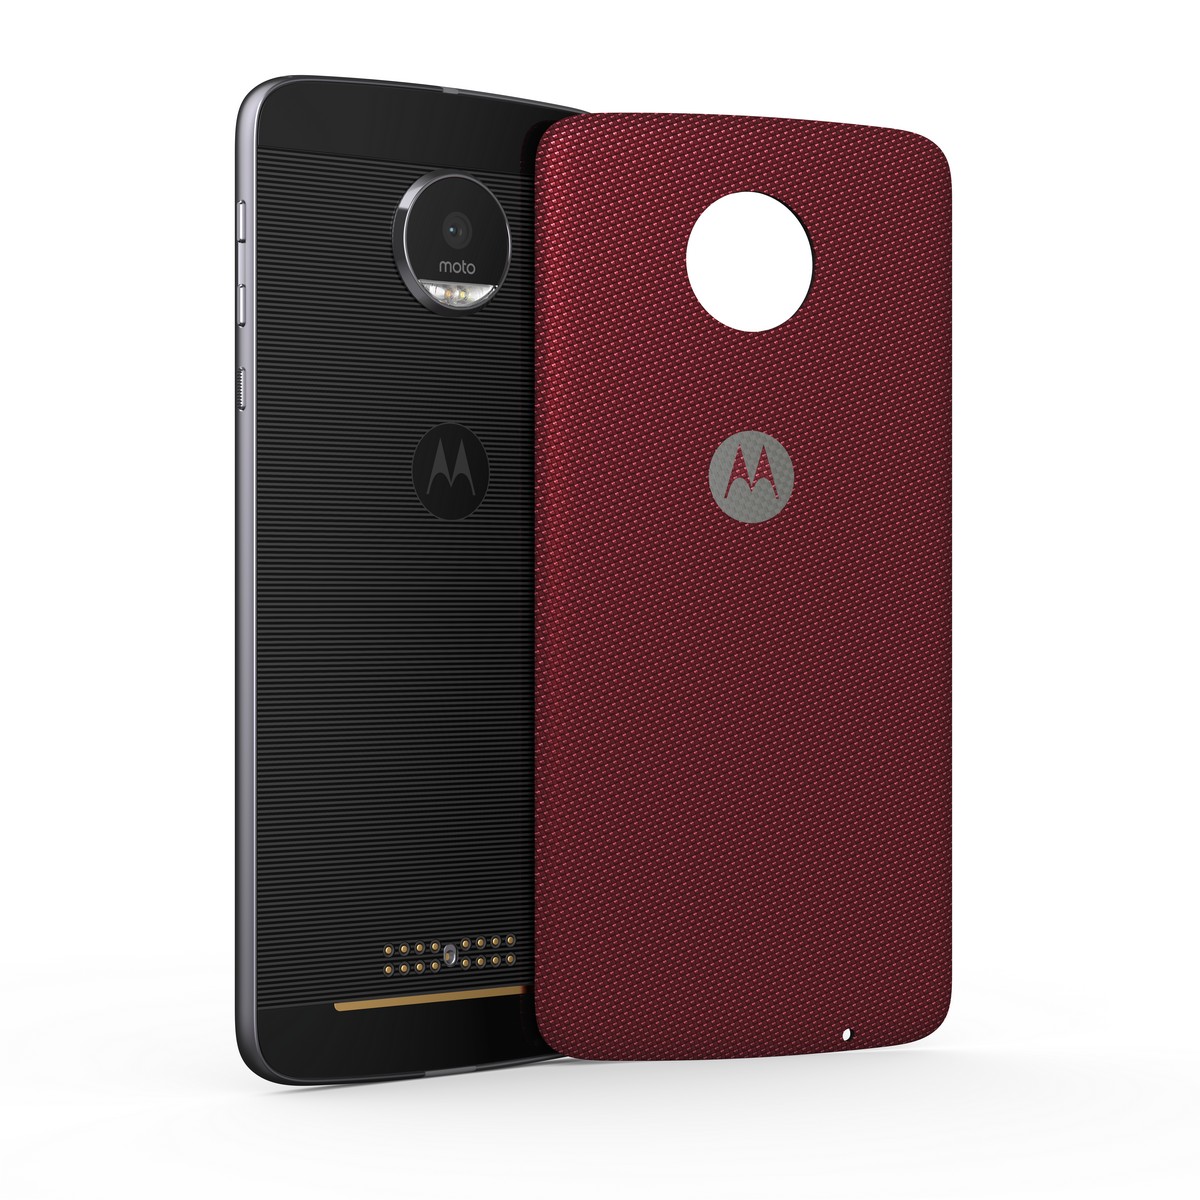 Image of Lenovo Case Style Shell voor Moto Z (Play) (rood)